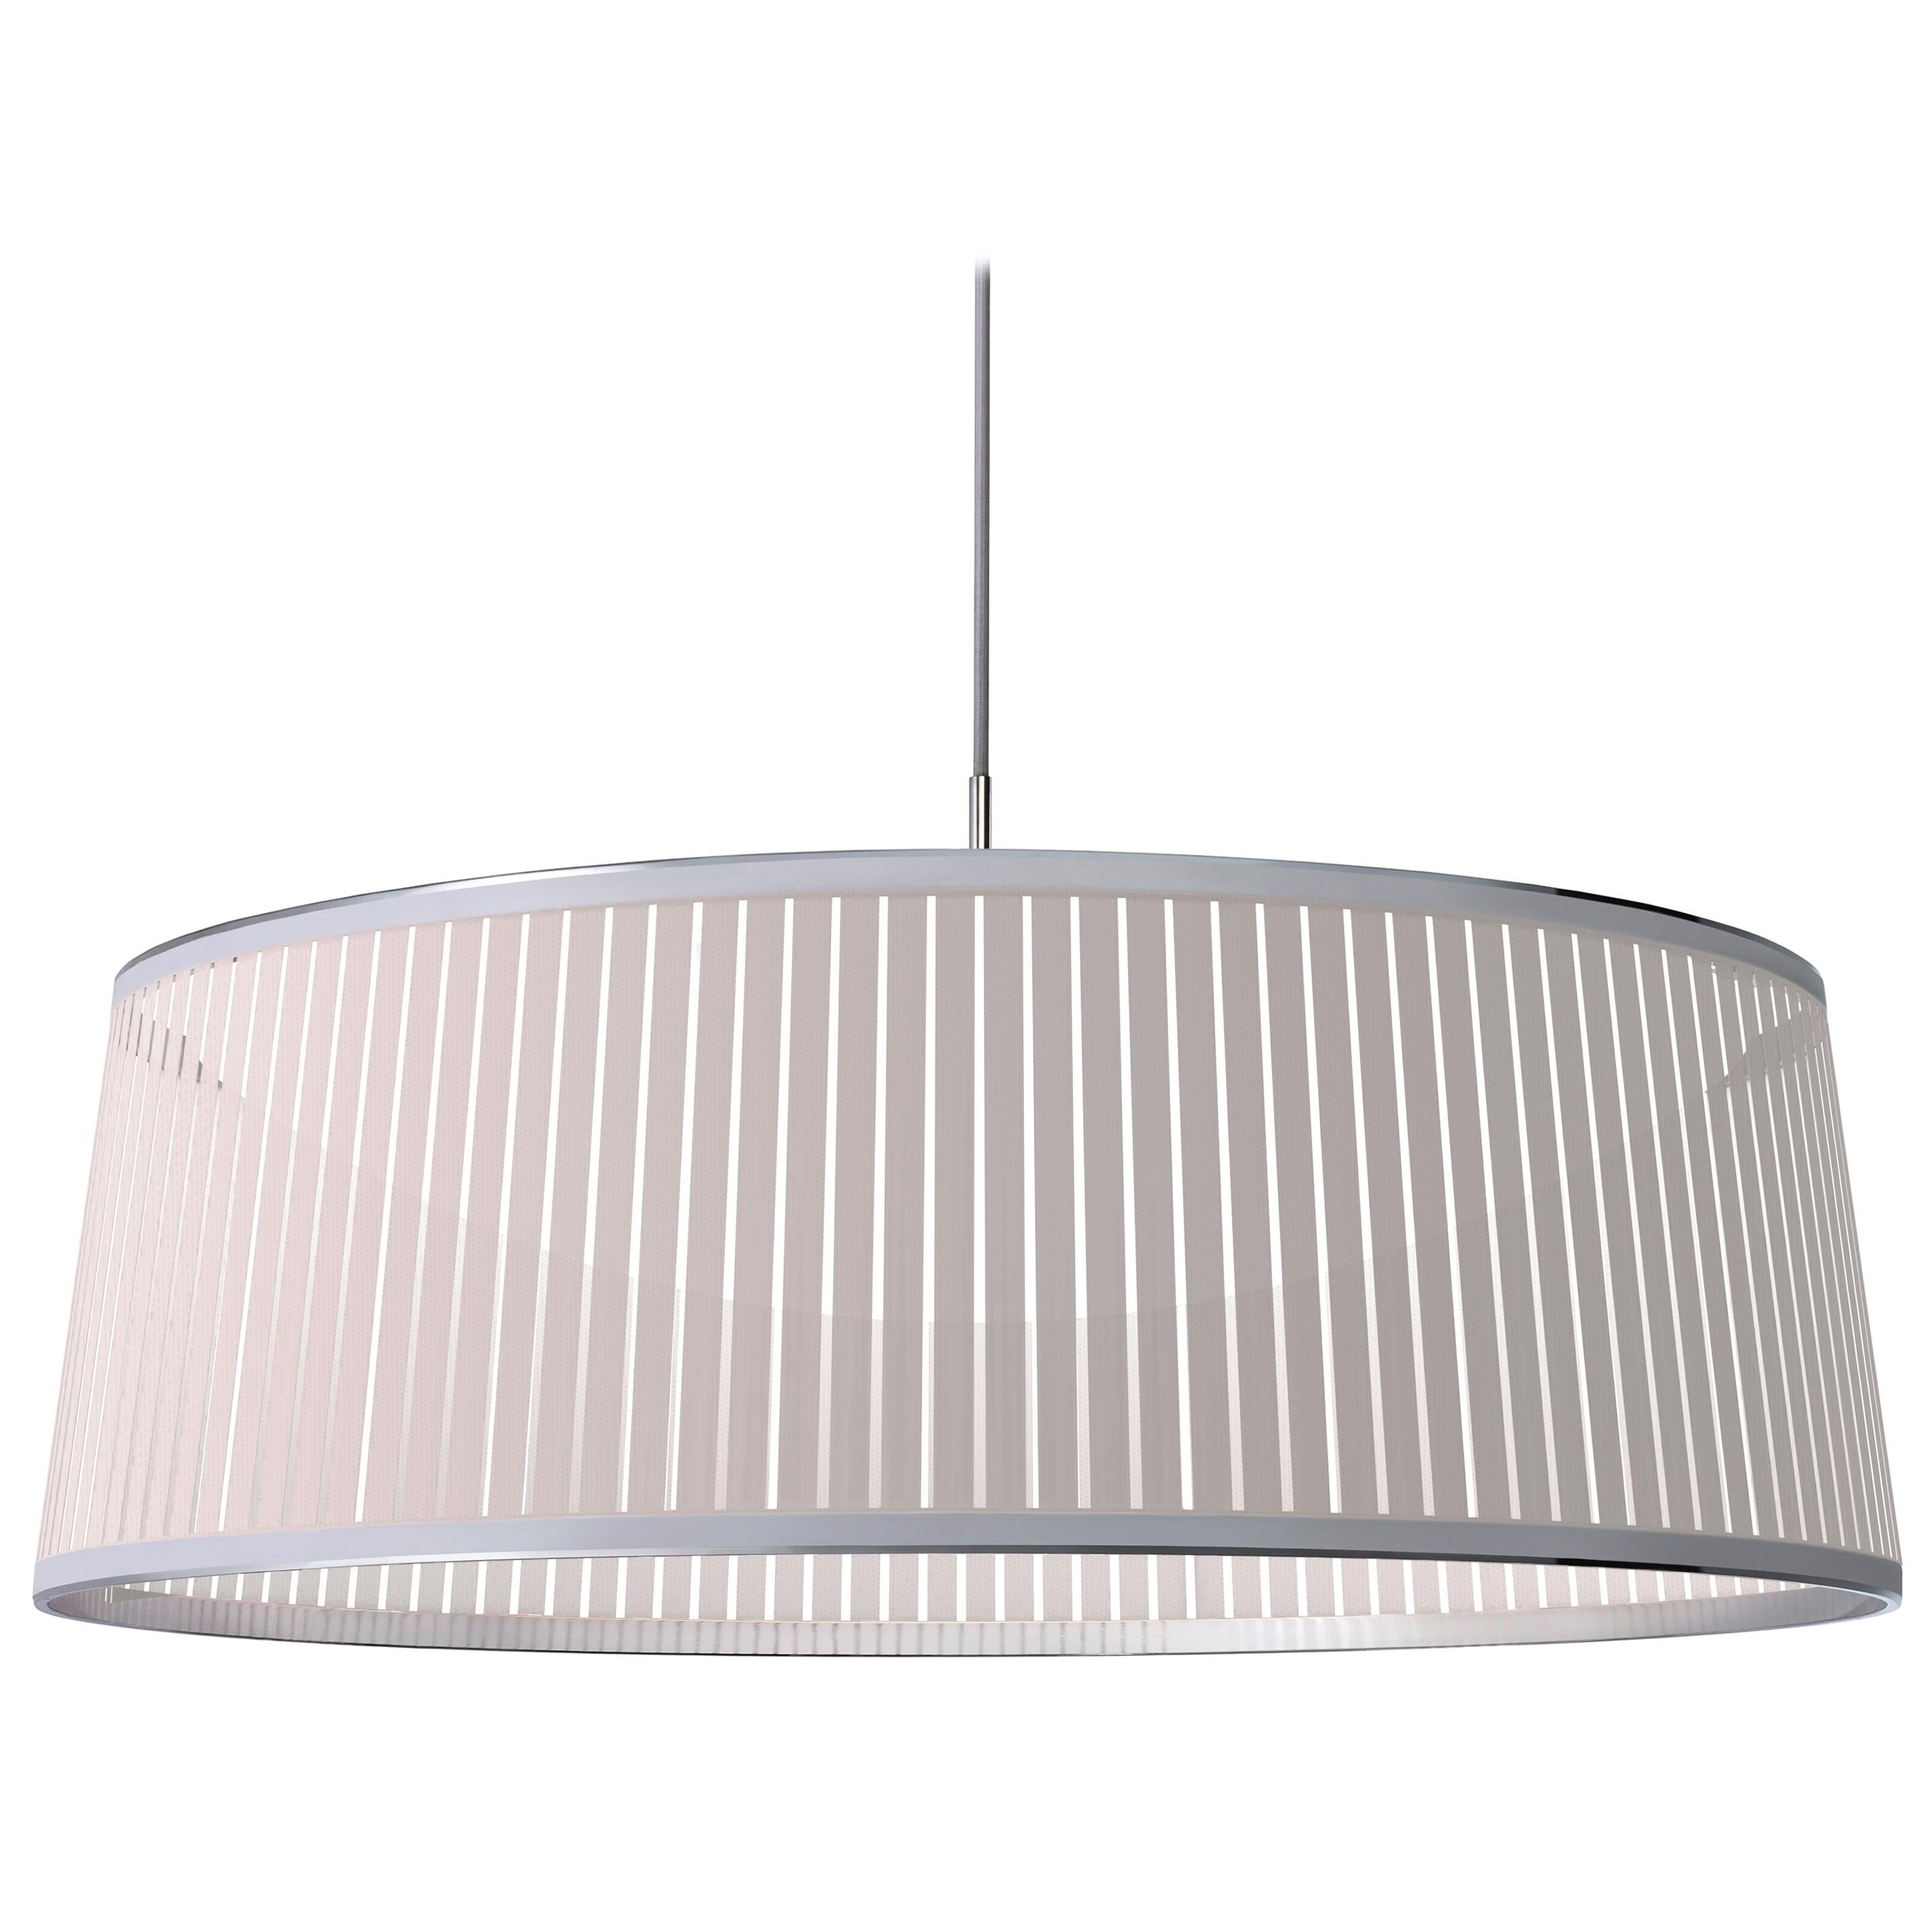 Solis Drum 36 Pendant Light in White by Pablo Designs For Sale